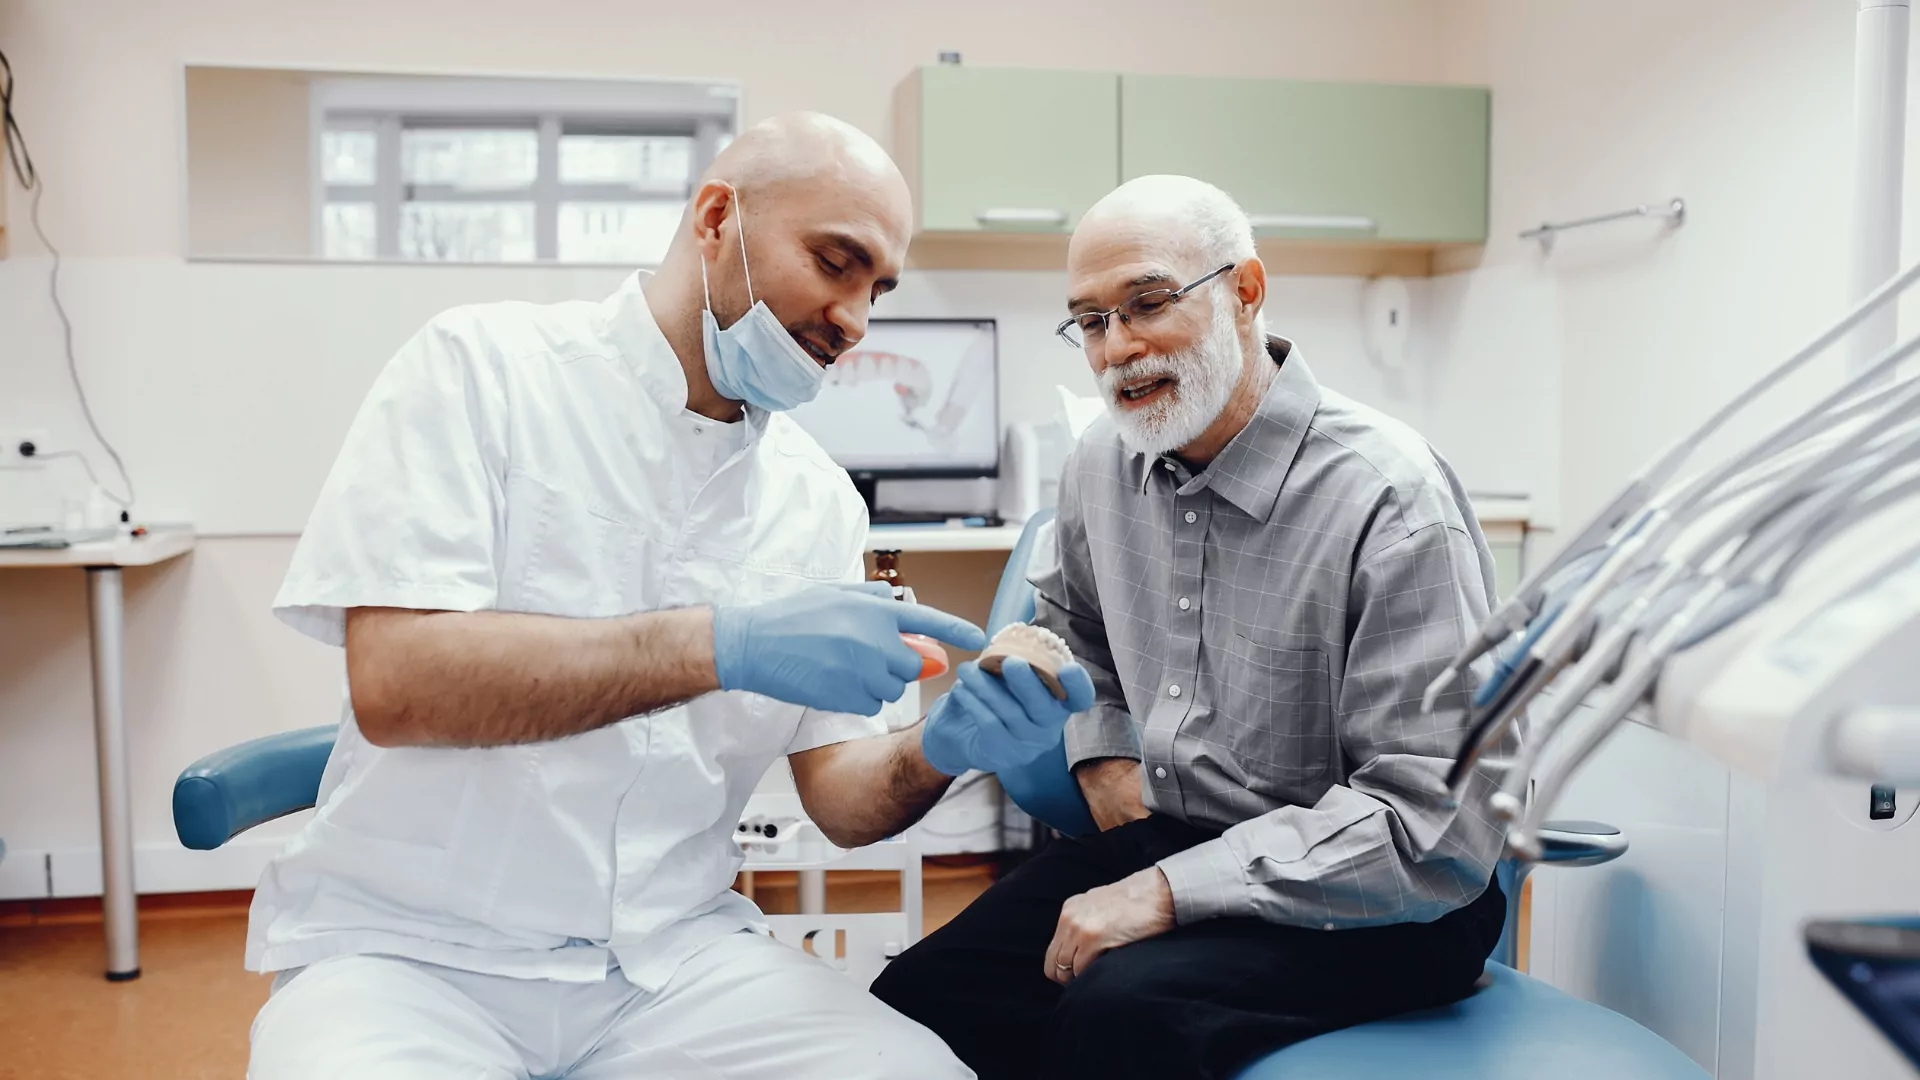 A Dentist Explaining Teeth Model To Patient